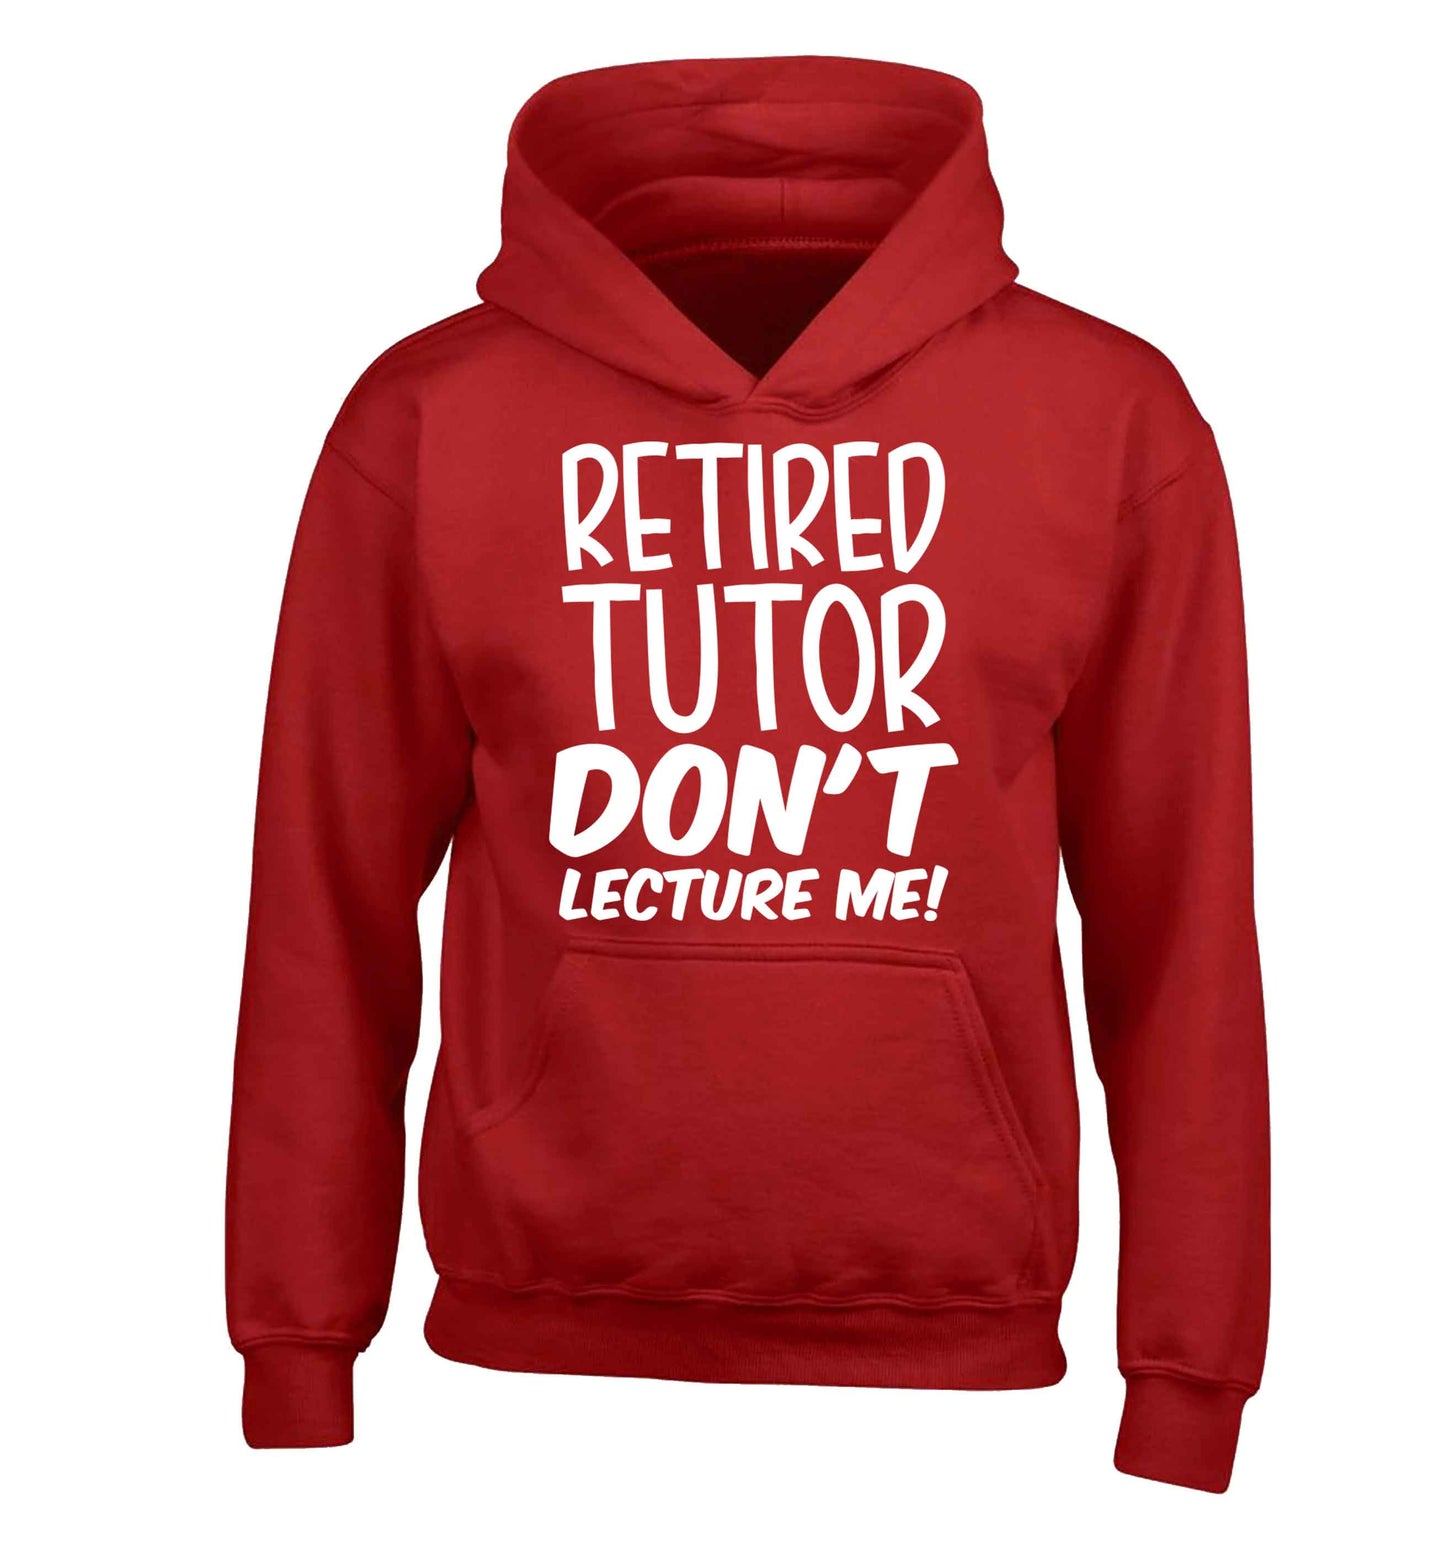 Retired tutor don't lecture me! children's red hoodie 12-13 Years